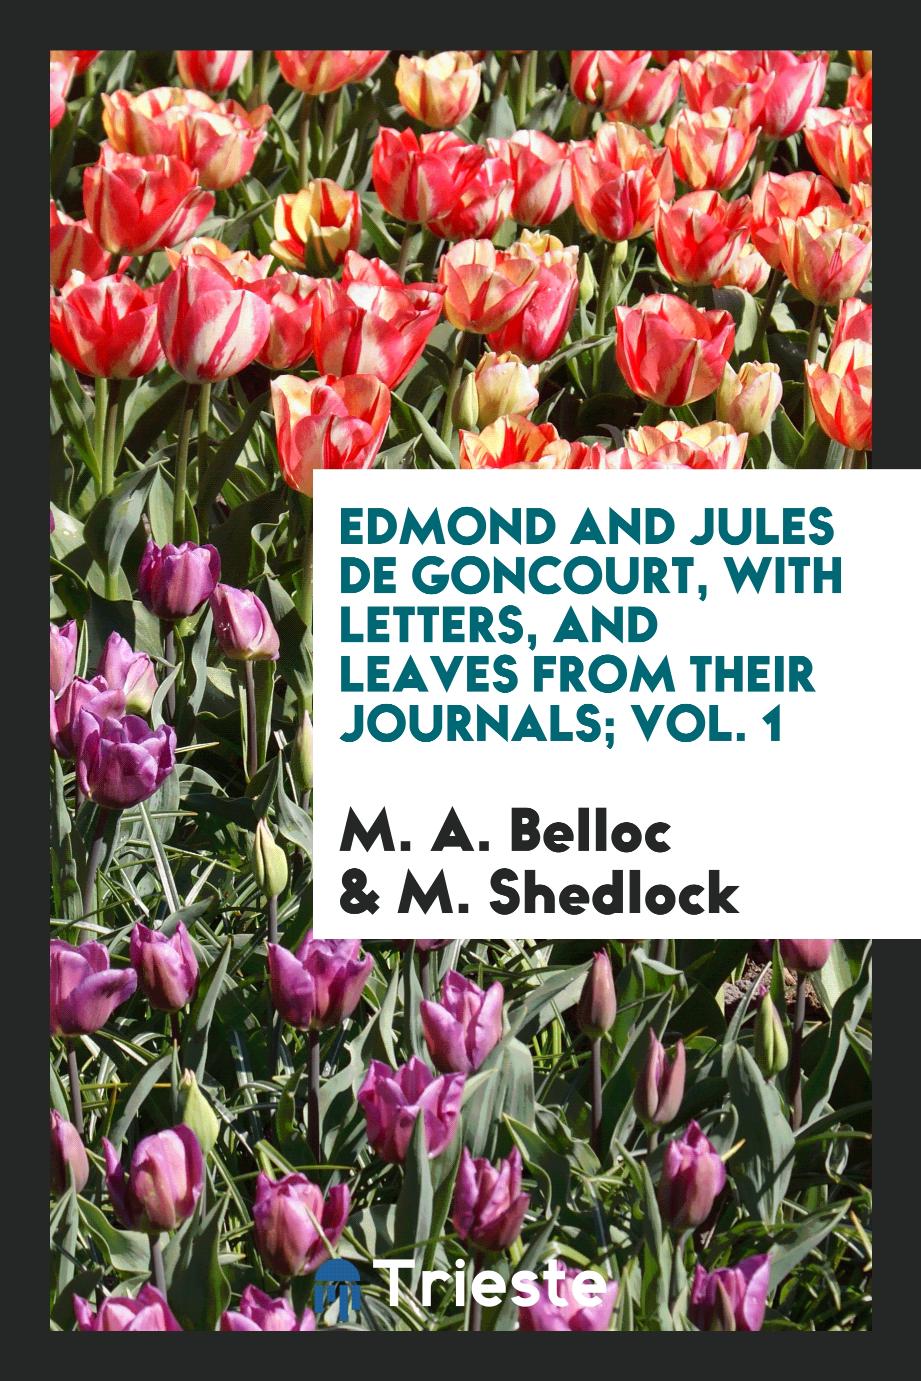 Edmond and Jules de Goncourt, with letters, and leaves from their journals; Vol. 1